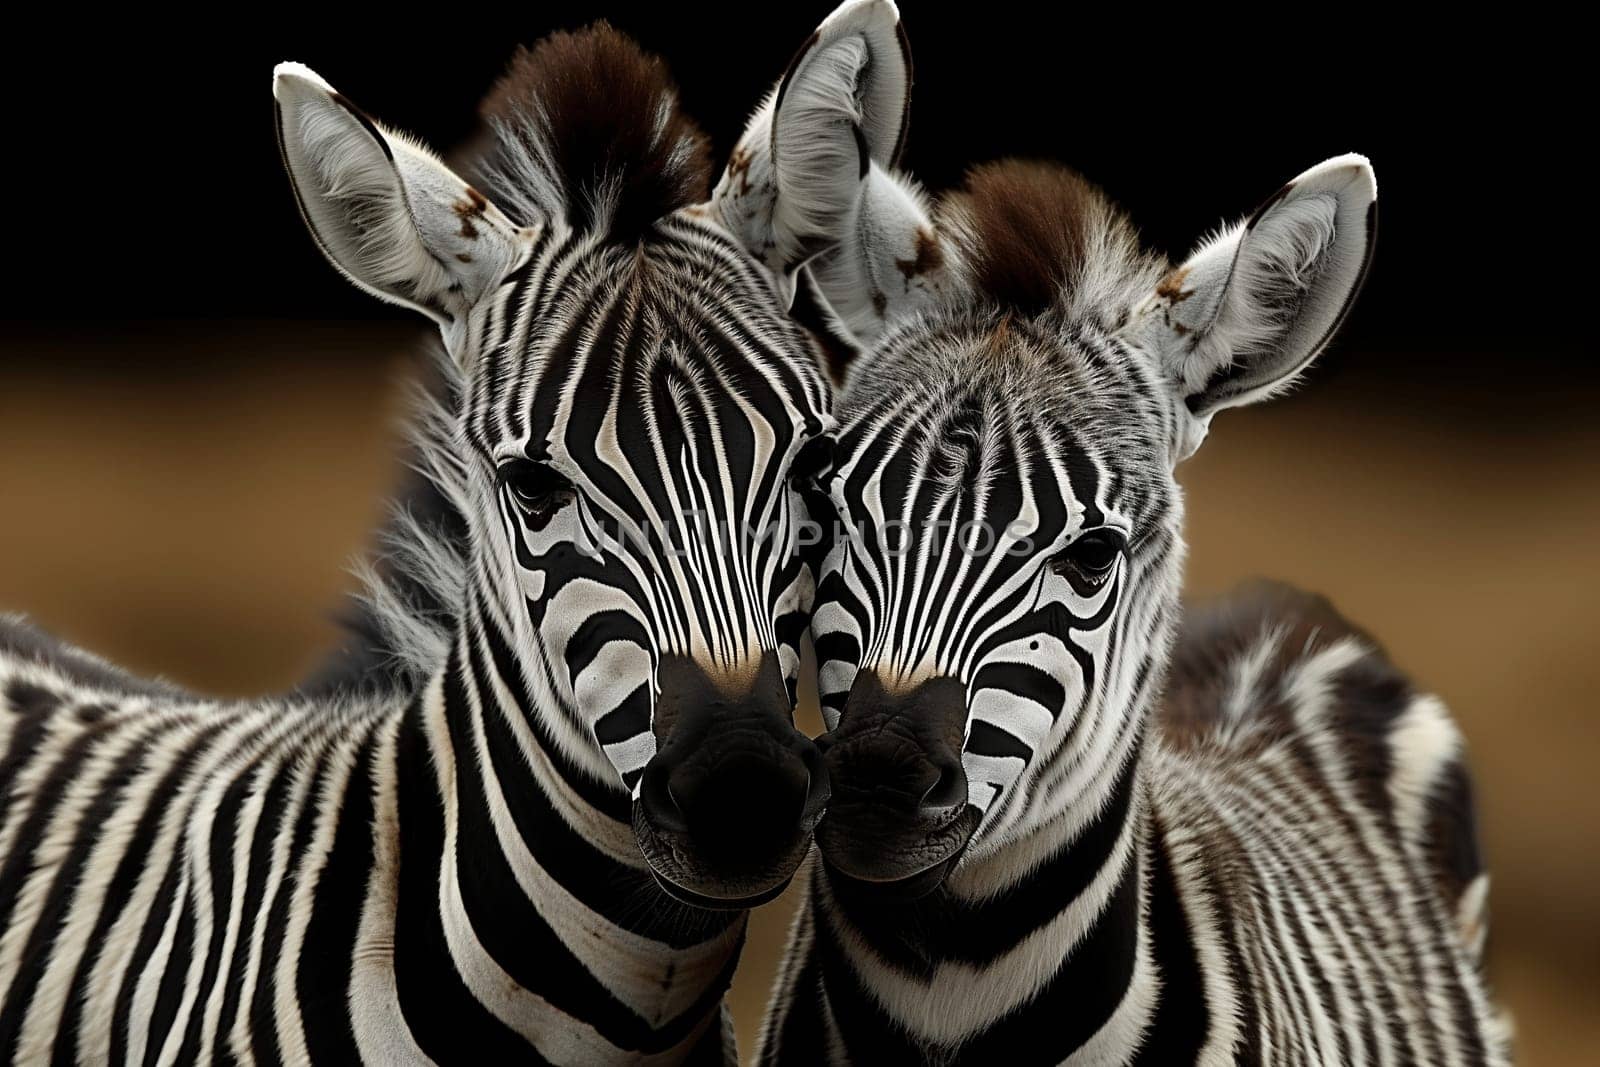 Two baby zebras with black and white striped hair are standing together, their heads turned towards the camera, showcasing their adorable faces and curious eyes in this nature photograph